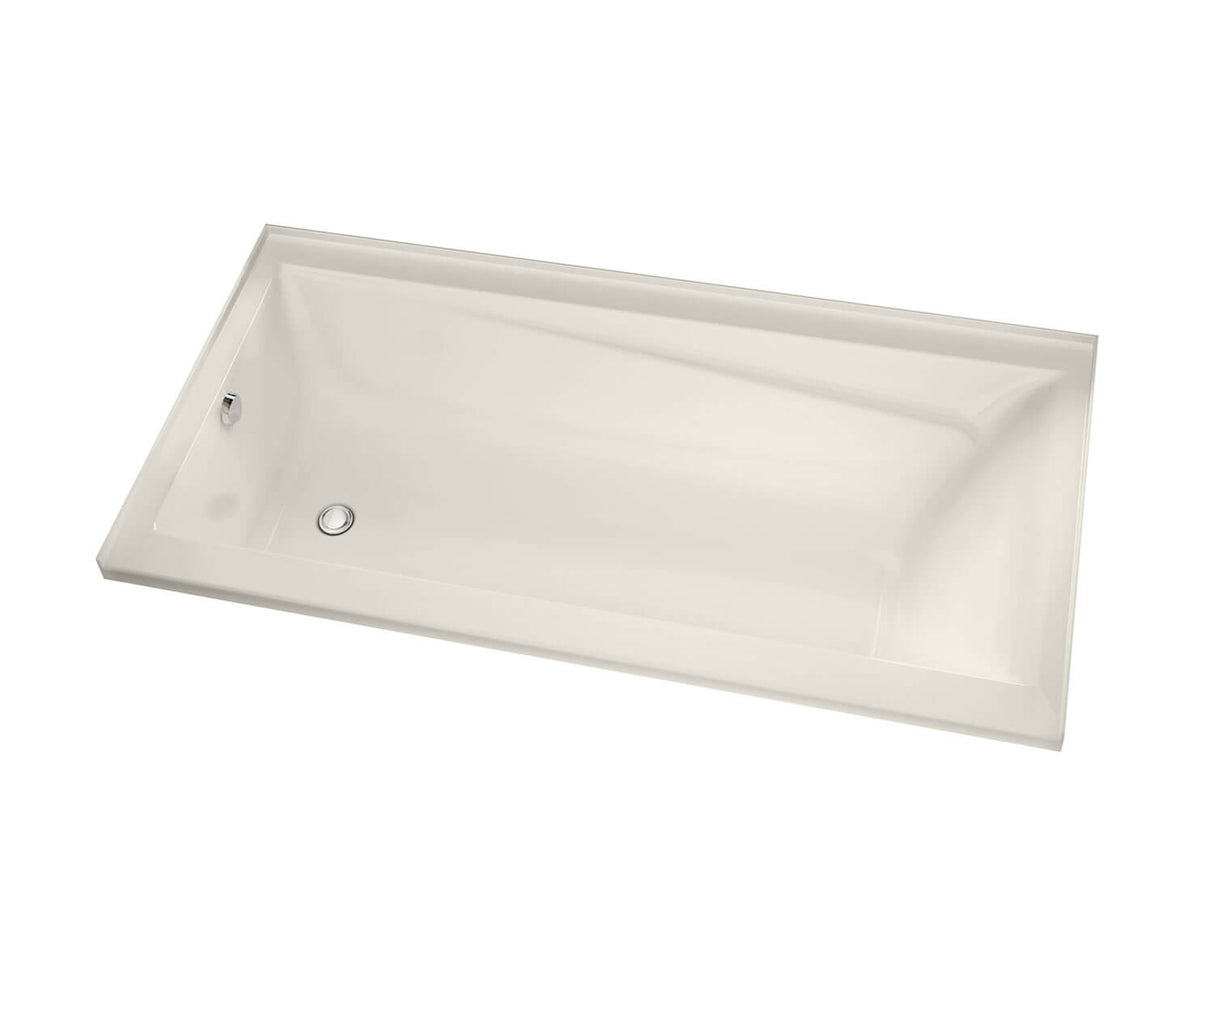 MAAX 106224-L-097-007 Exhibit 7232 IF Acrylic Alcove Left-Hand Drain Combined Whirlpool & Aeroeffect Bathtub in Biscuit